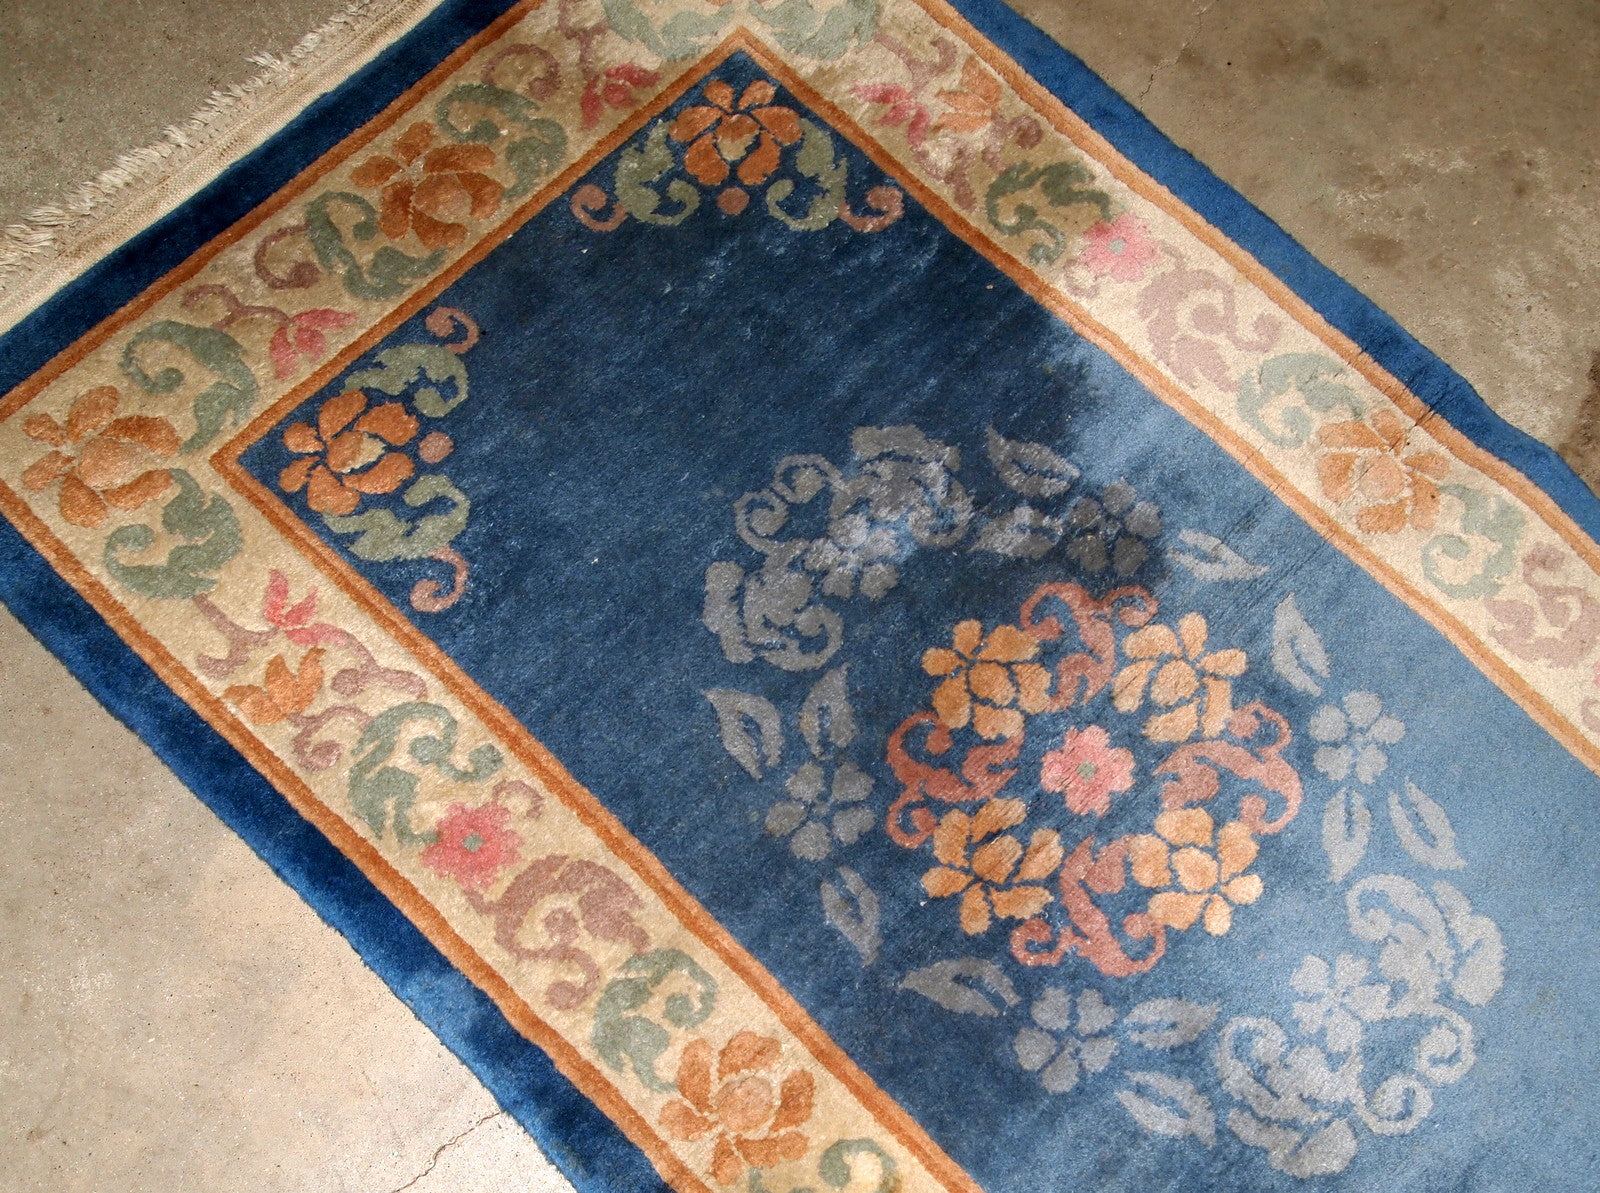 Antique handmade Art Deco Chinese rug in blue shade and traditional floral design. The rug is from 1960s in original good condition.